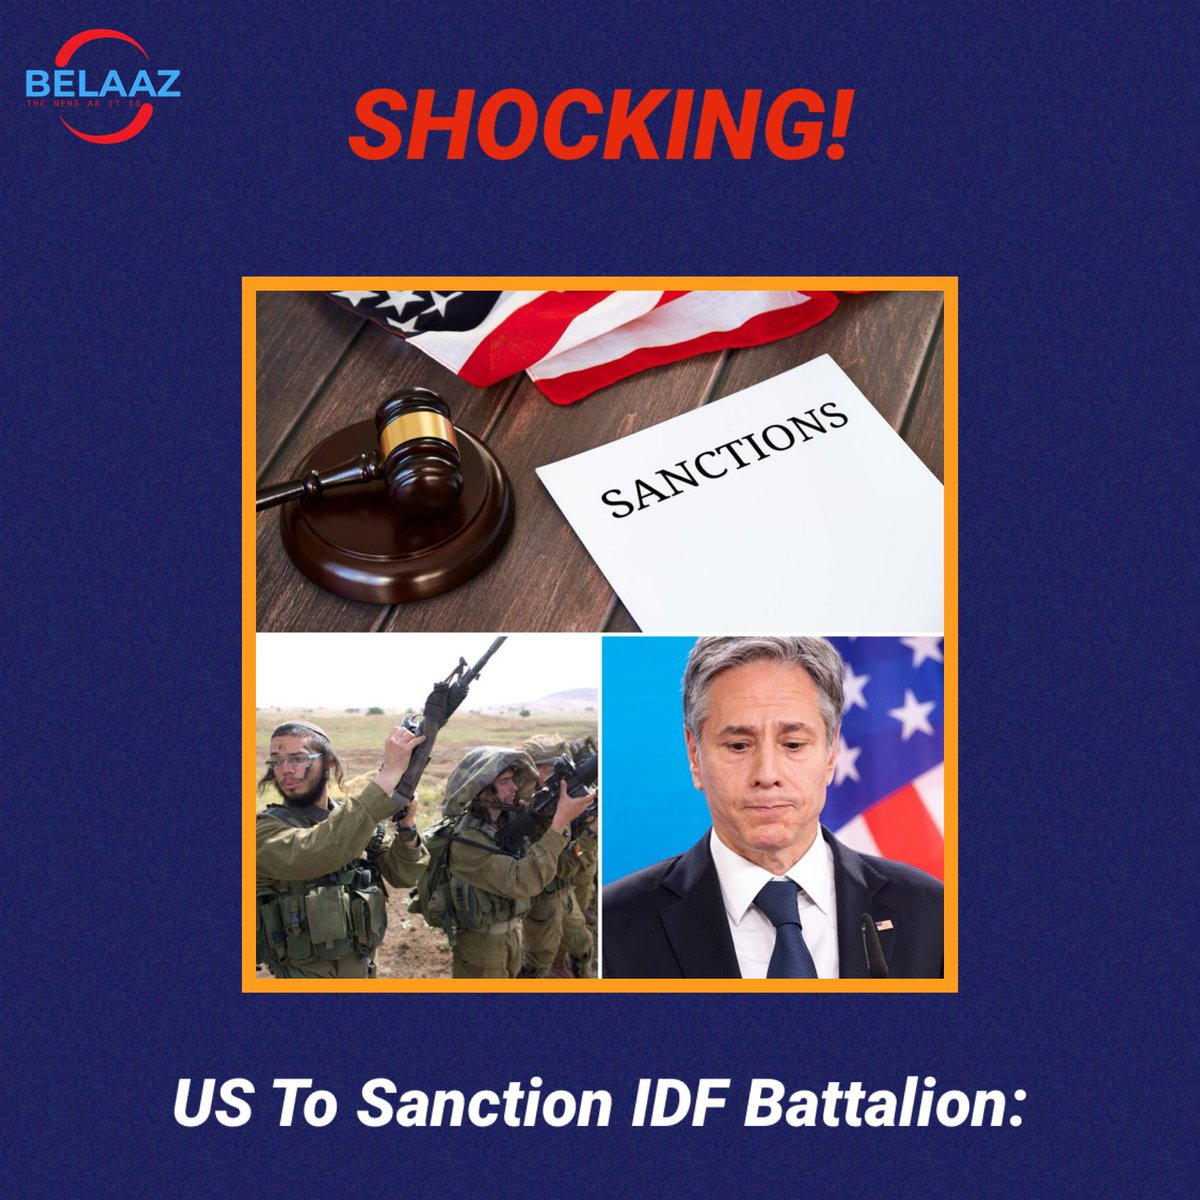 🇺🇸🇮🇱 - SICKENING — US TO SANCTION IDF BATTALION: US Secretary of State Antony Blinken is expected to announce sanctions against the IDF 'Netzach Yehudah' battalion for alleged “human rights violations” in Judea and Samaria, according to Axios. This would be a first - the US has